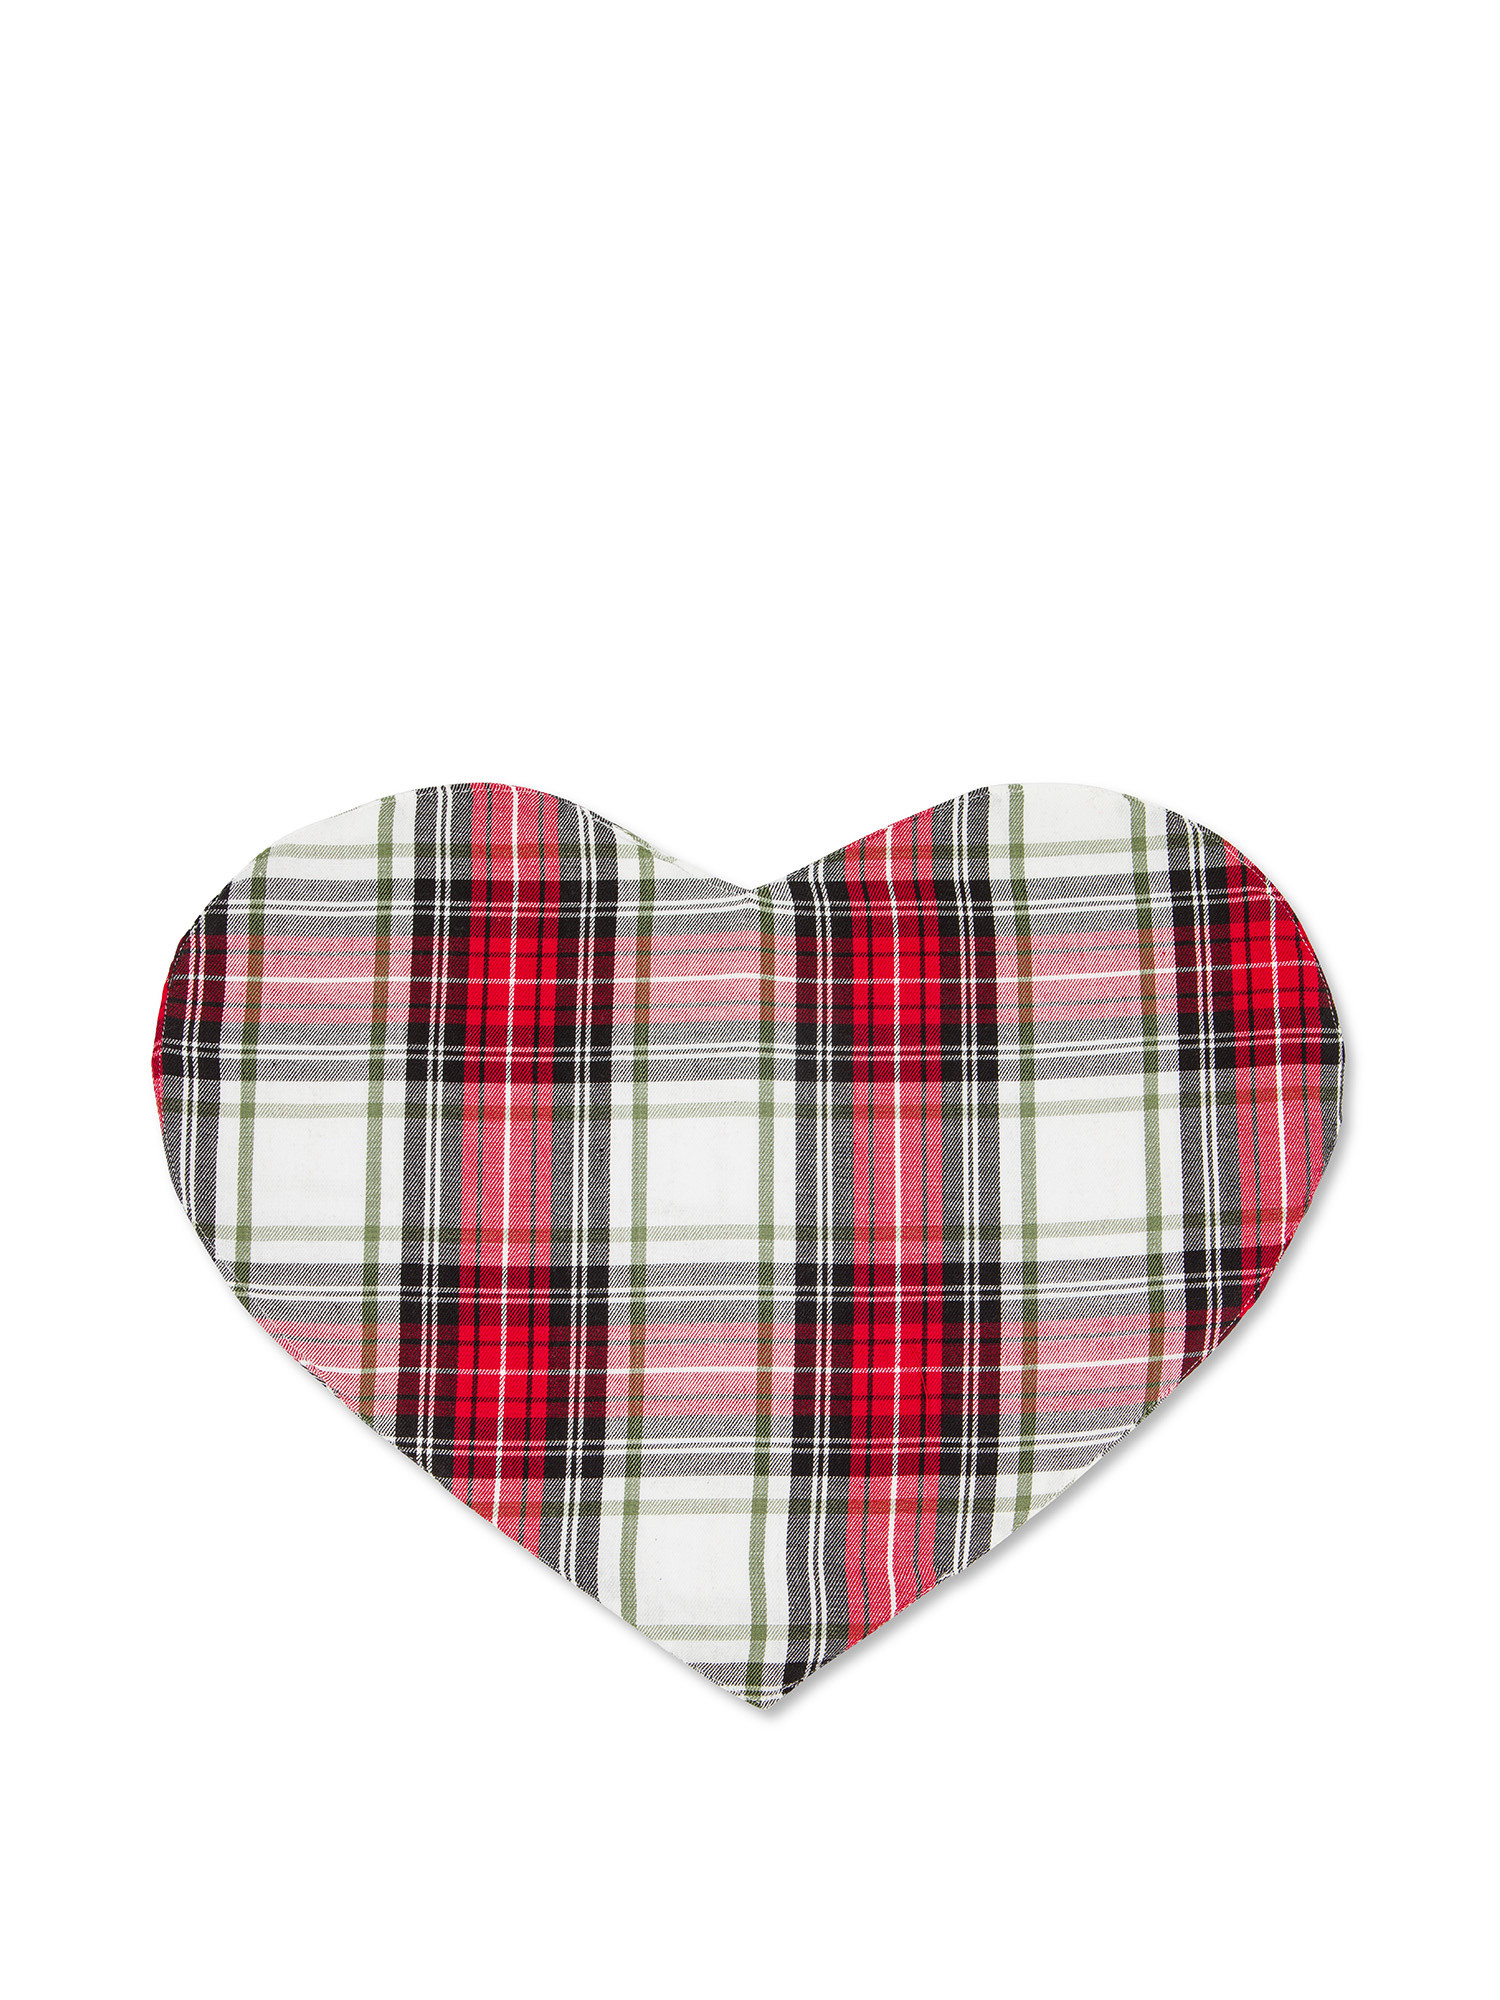 Heart tartan cotton twill placemat, White, large image number 0